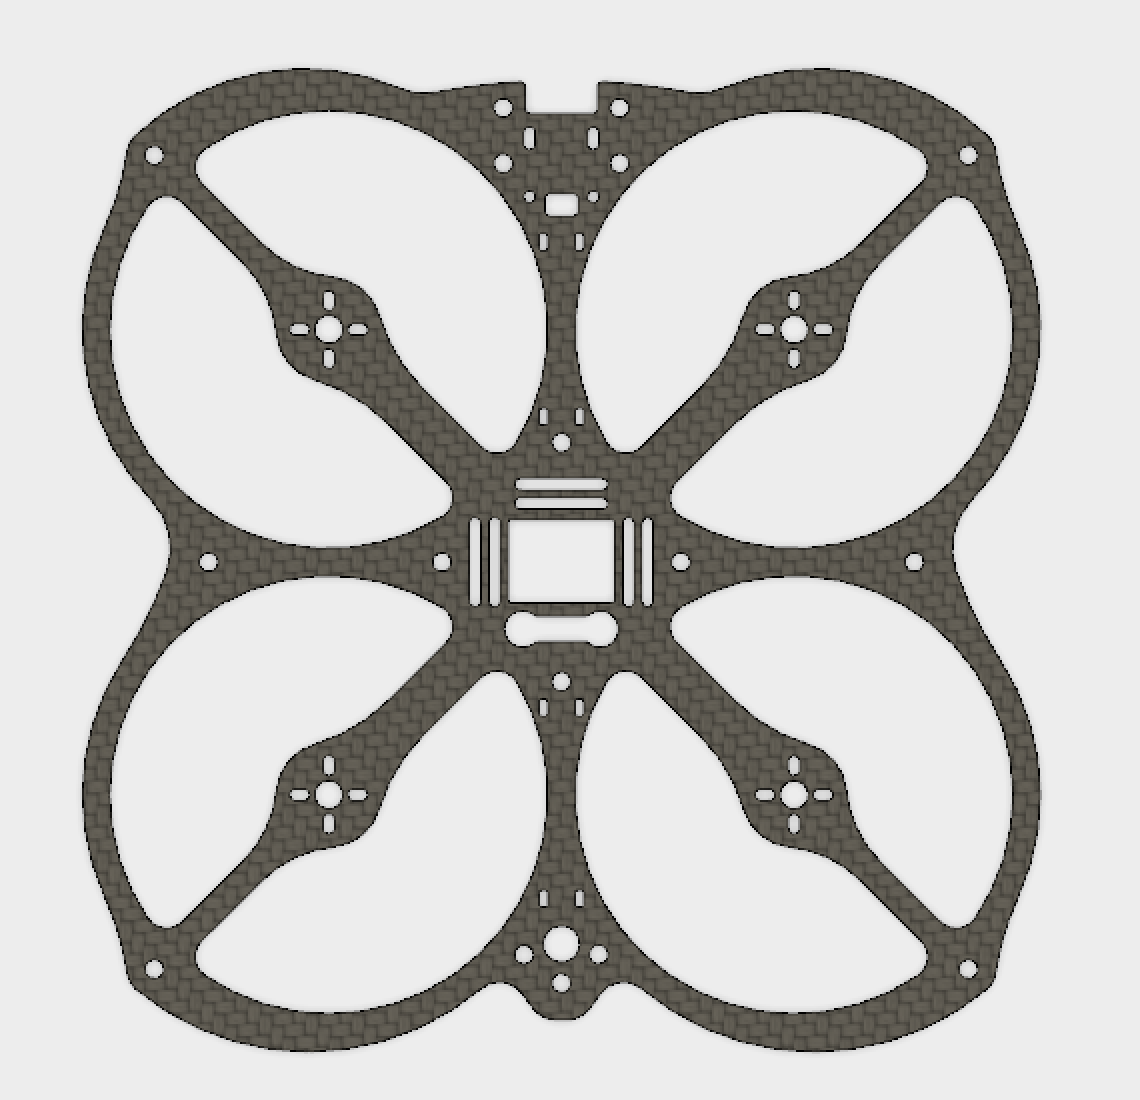 Owl - Main Plate with Motor mounts